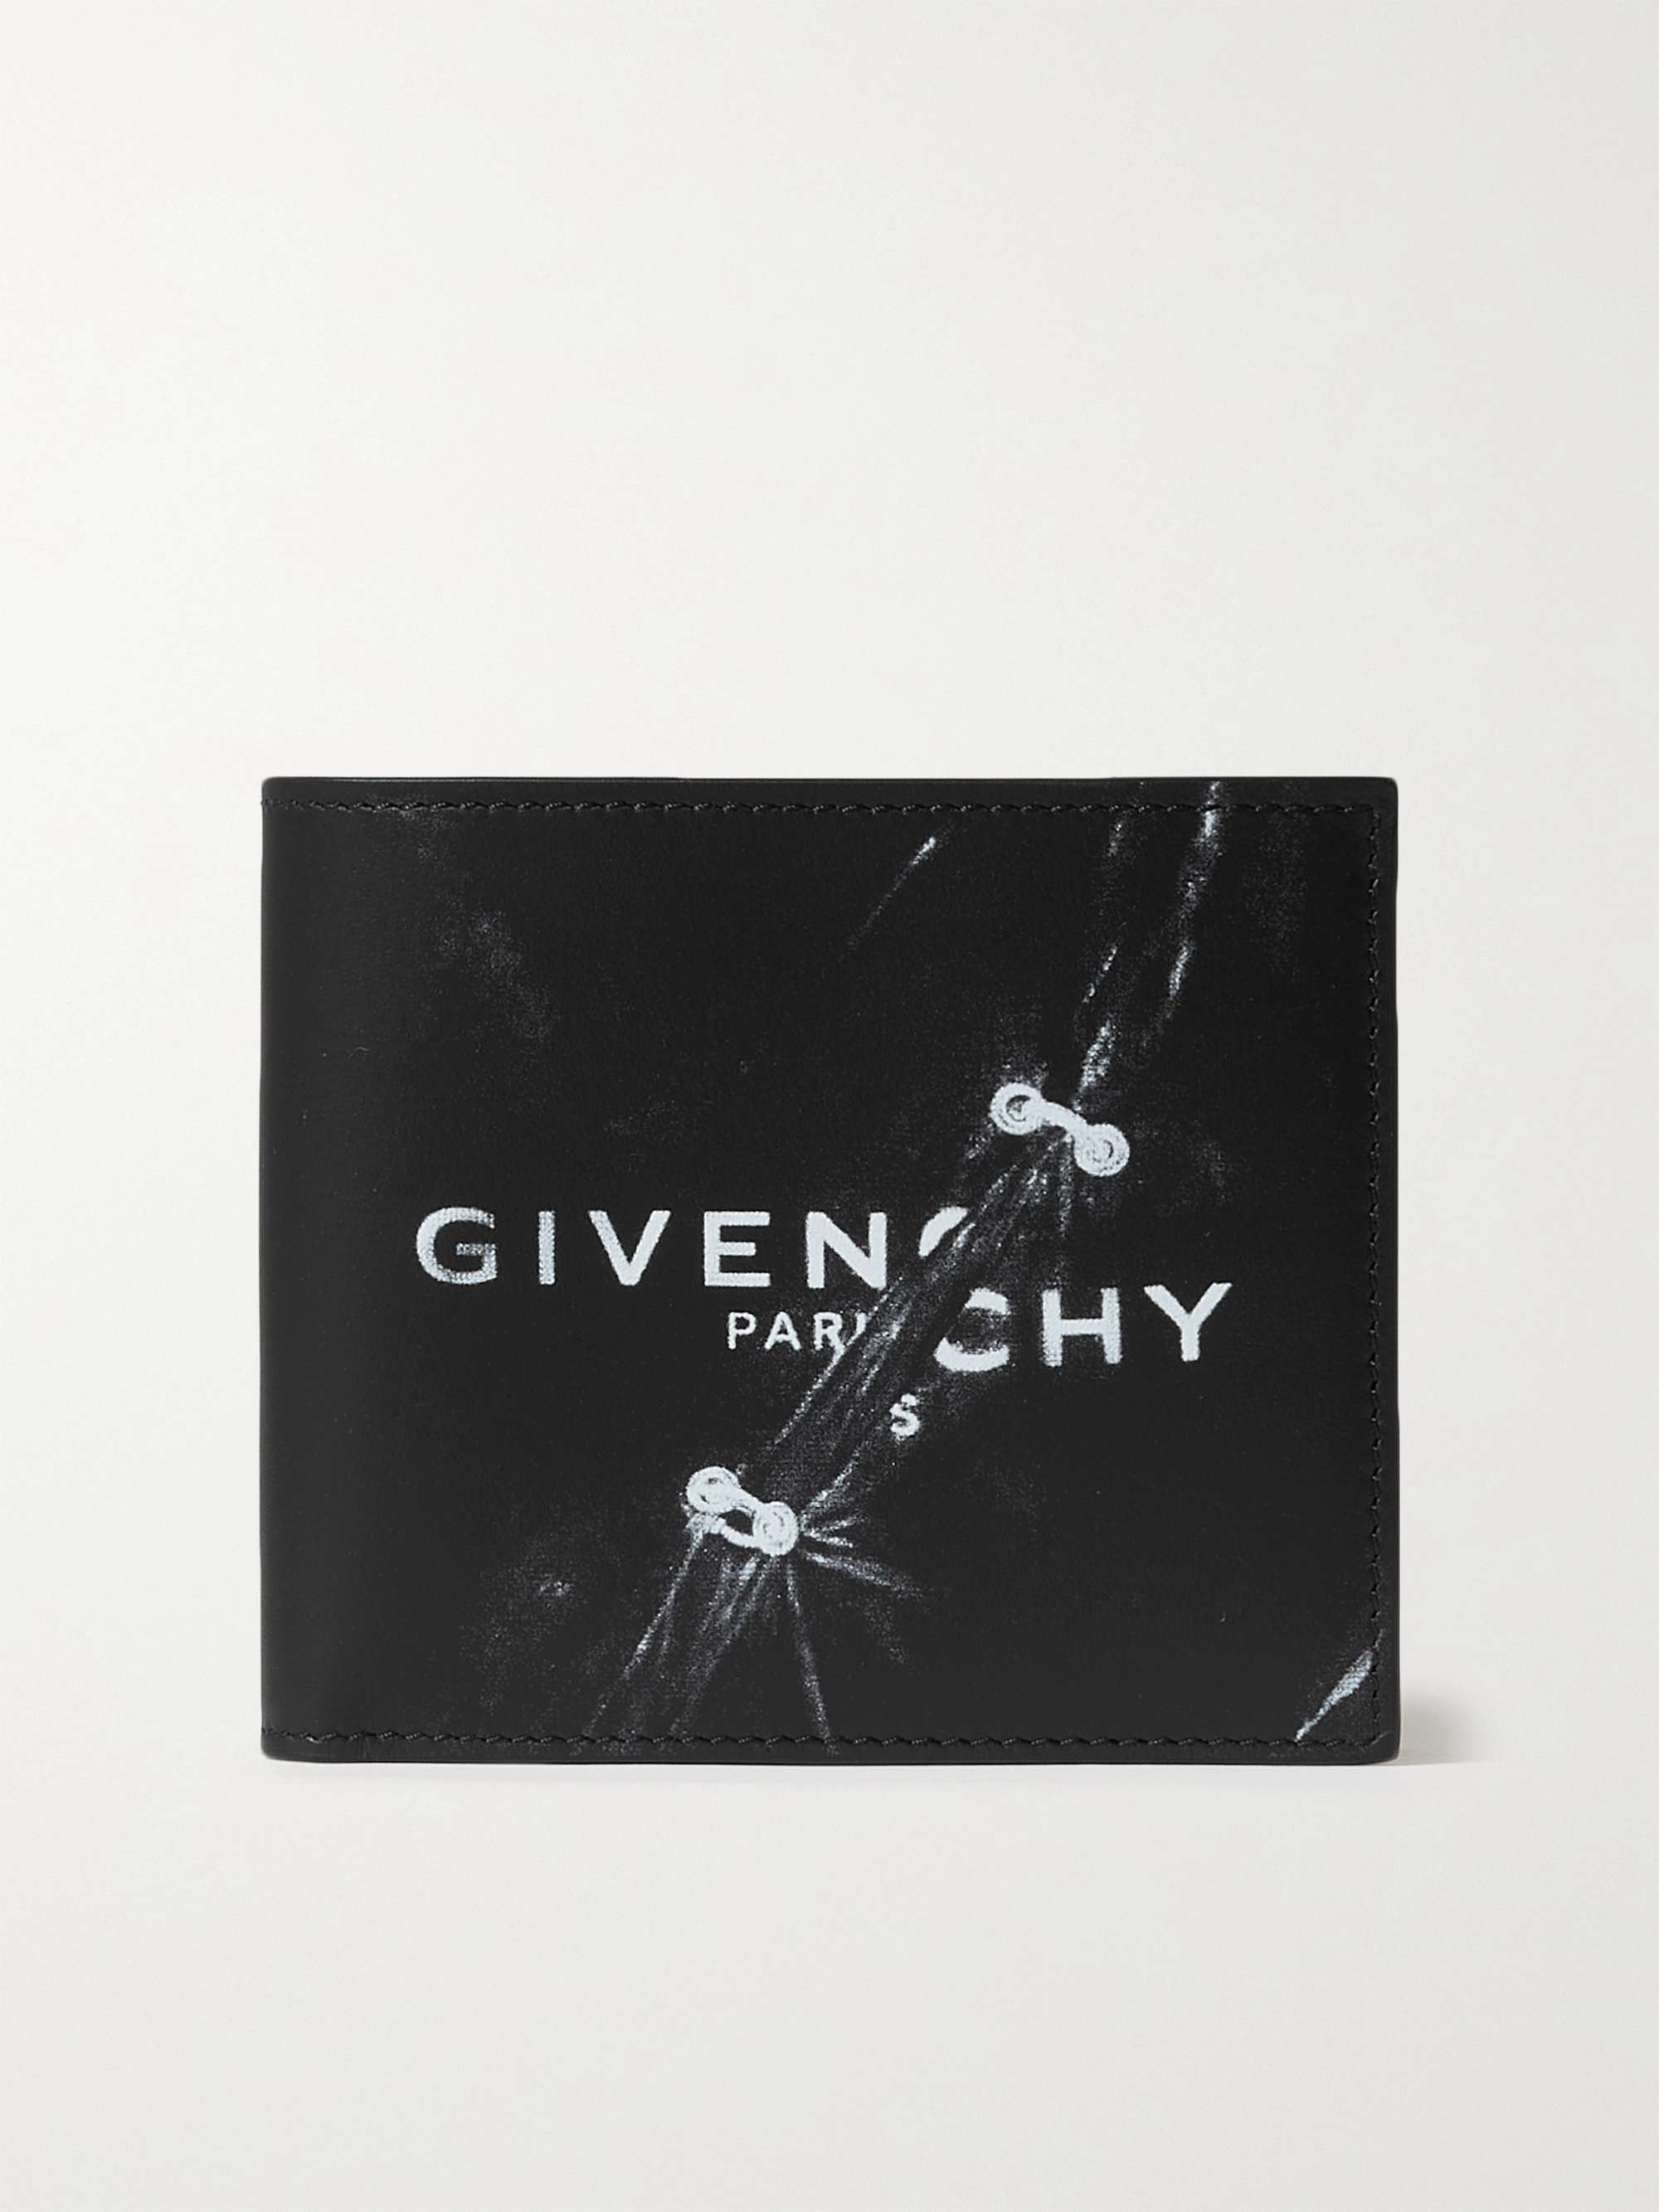 GIVENCHY Logo-Print Leather Bifold Wallet